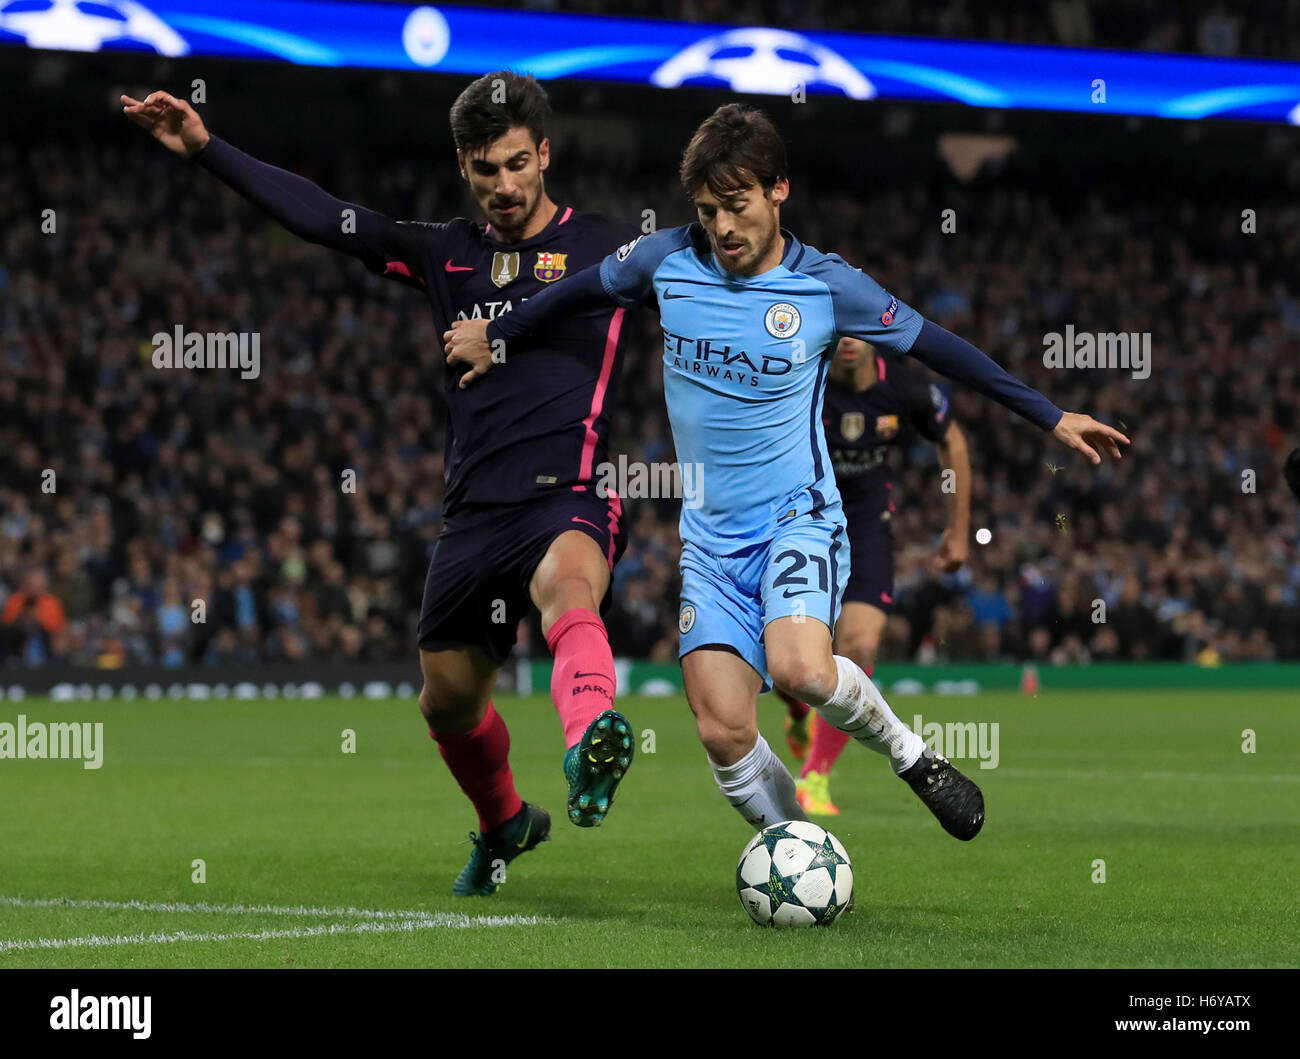 Barcelona's AndrÃ© Gomes (left) battles for the ball with Manchester City's David Silva (right) during the UEFA Champions League match at the Etihad Stadium, Manchester. Stock Photo